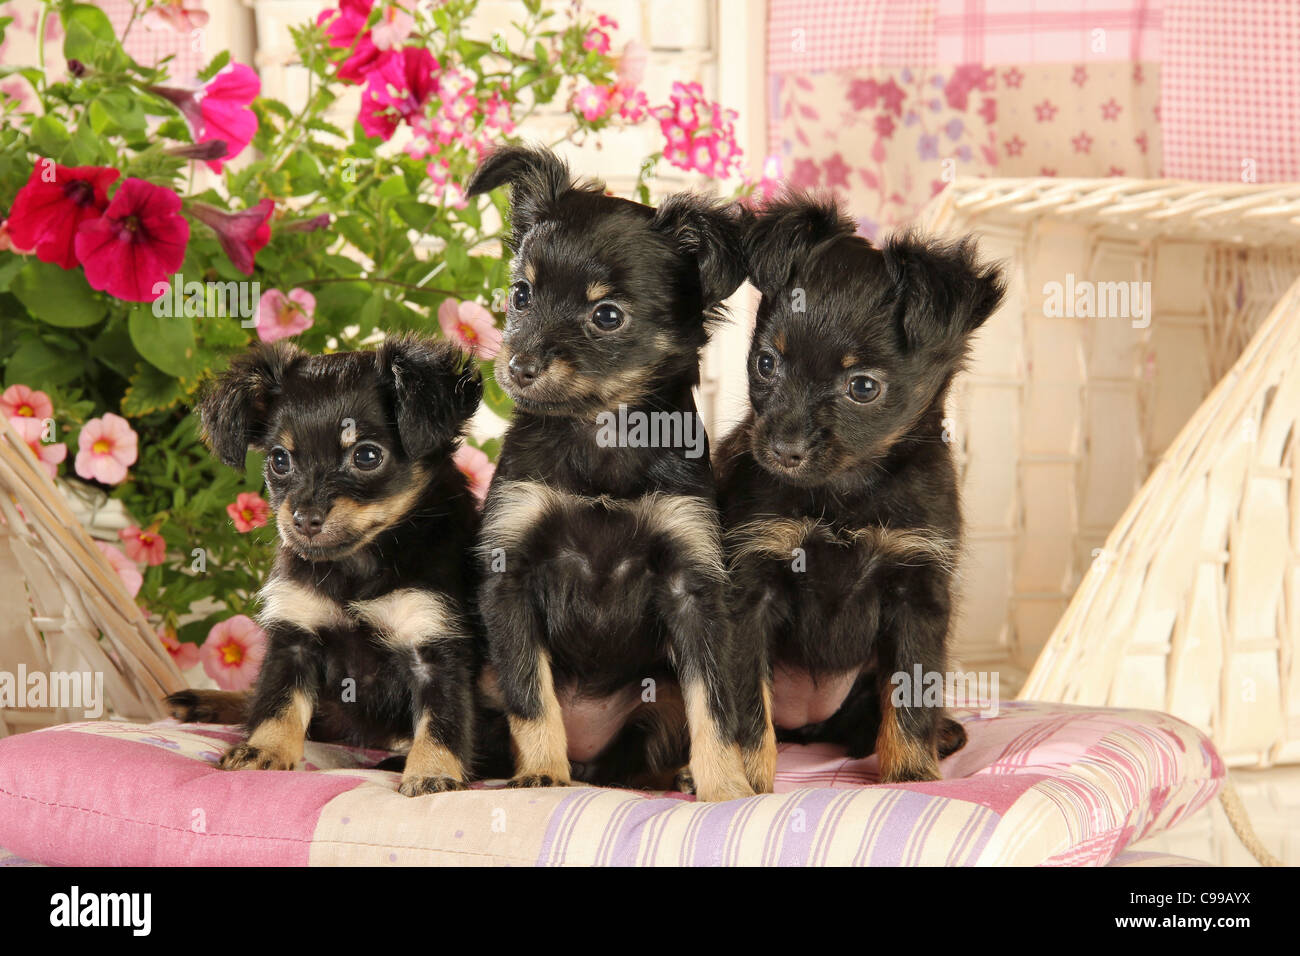 Russian Toy Terrier dog three puppies sitting Stock Photo